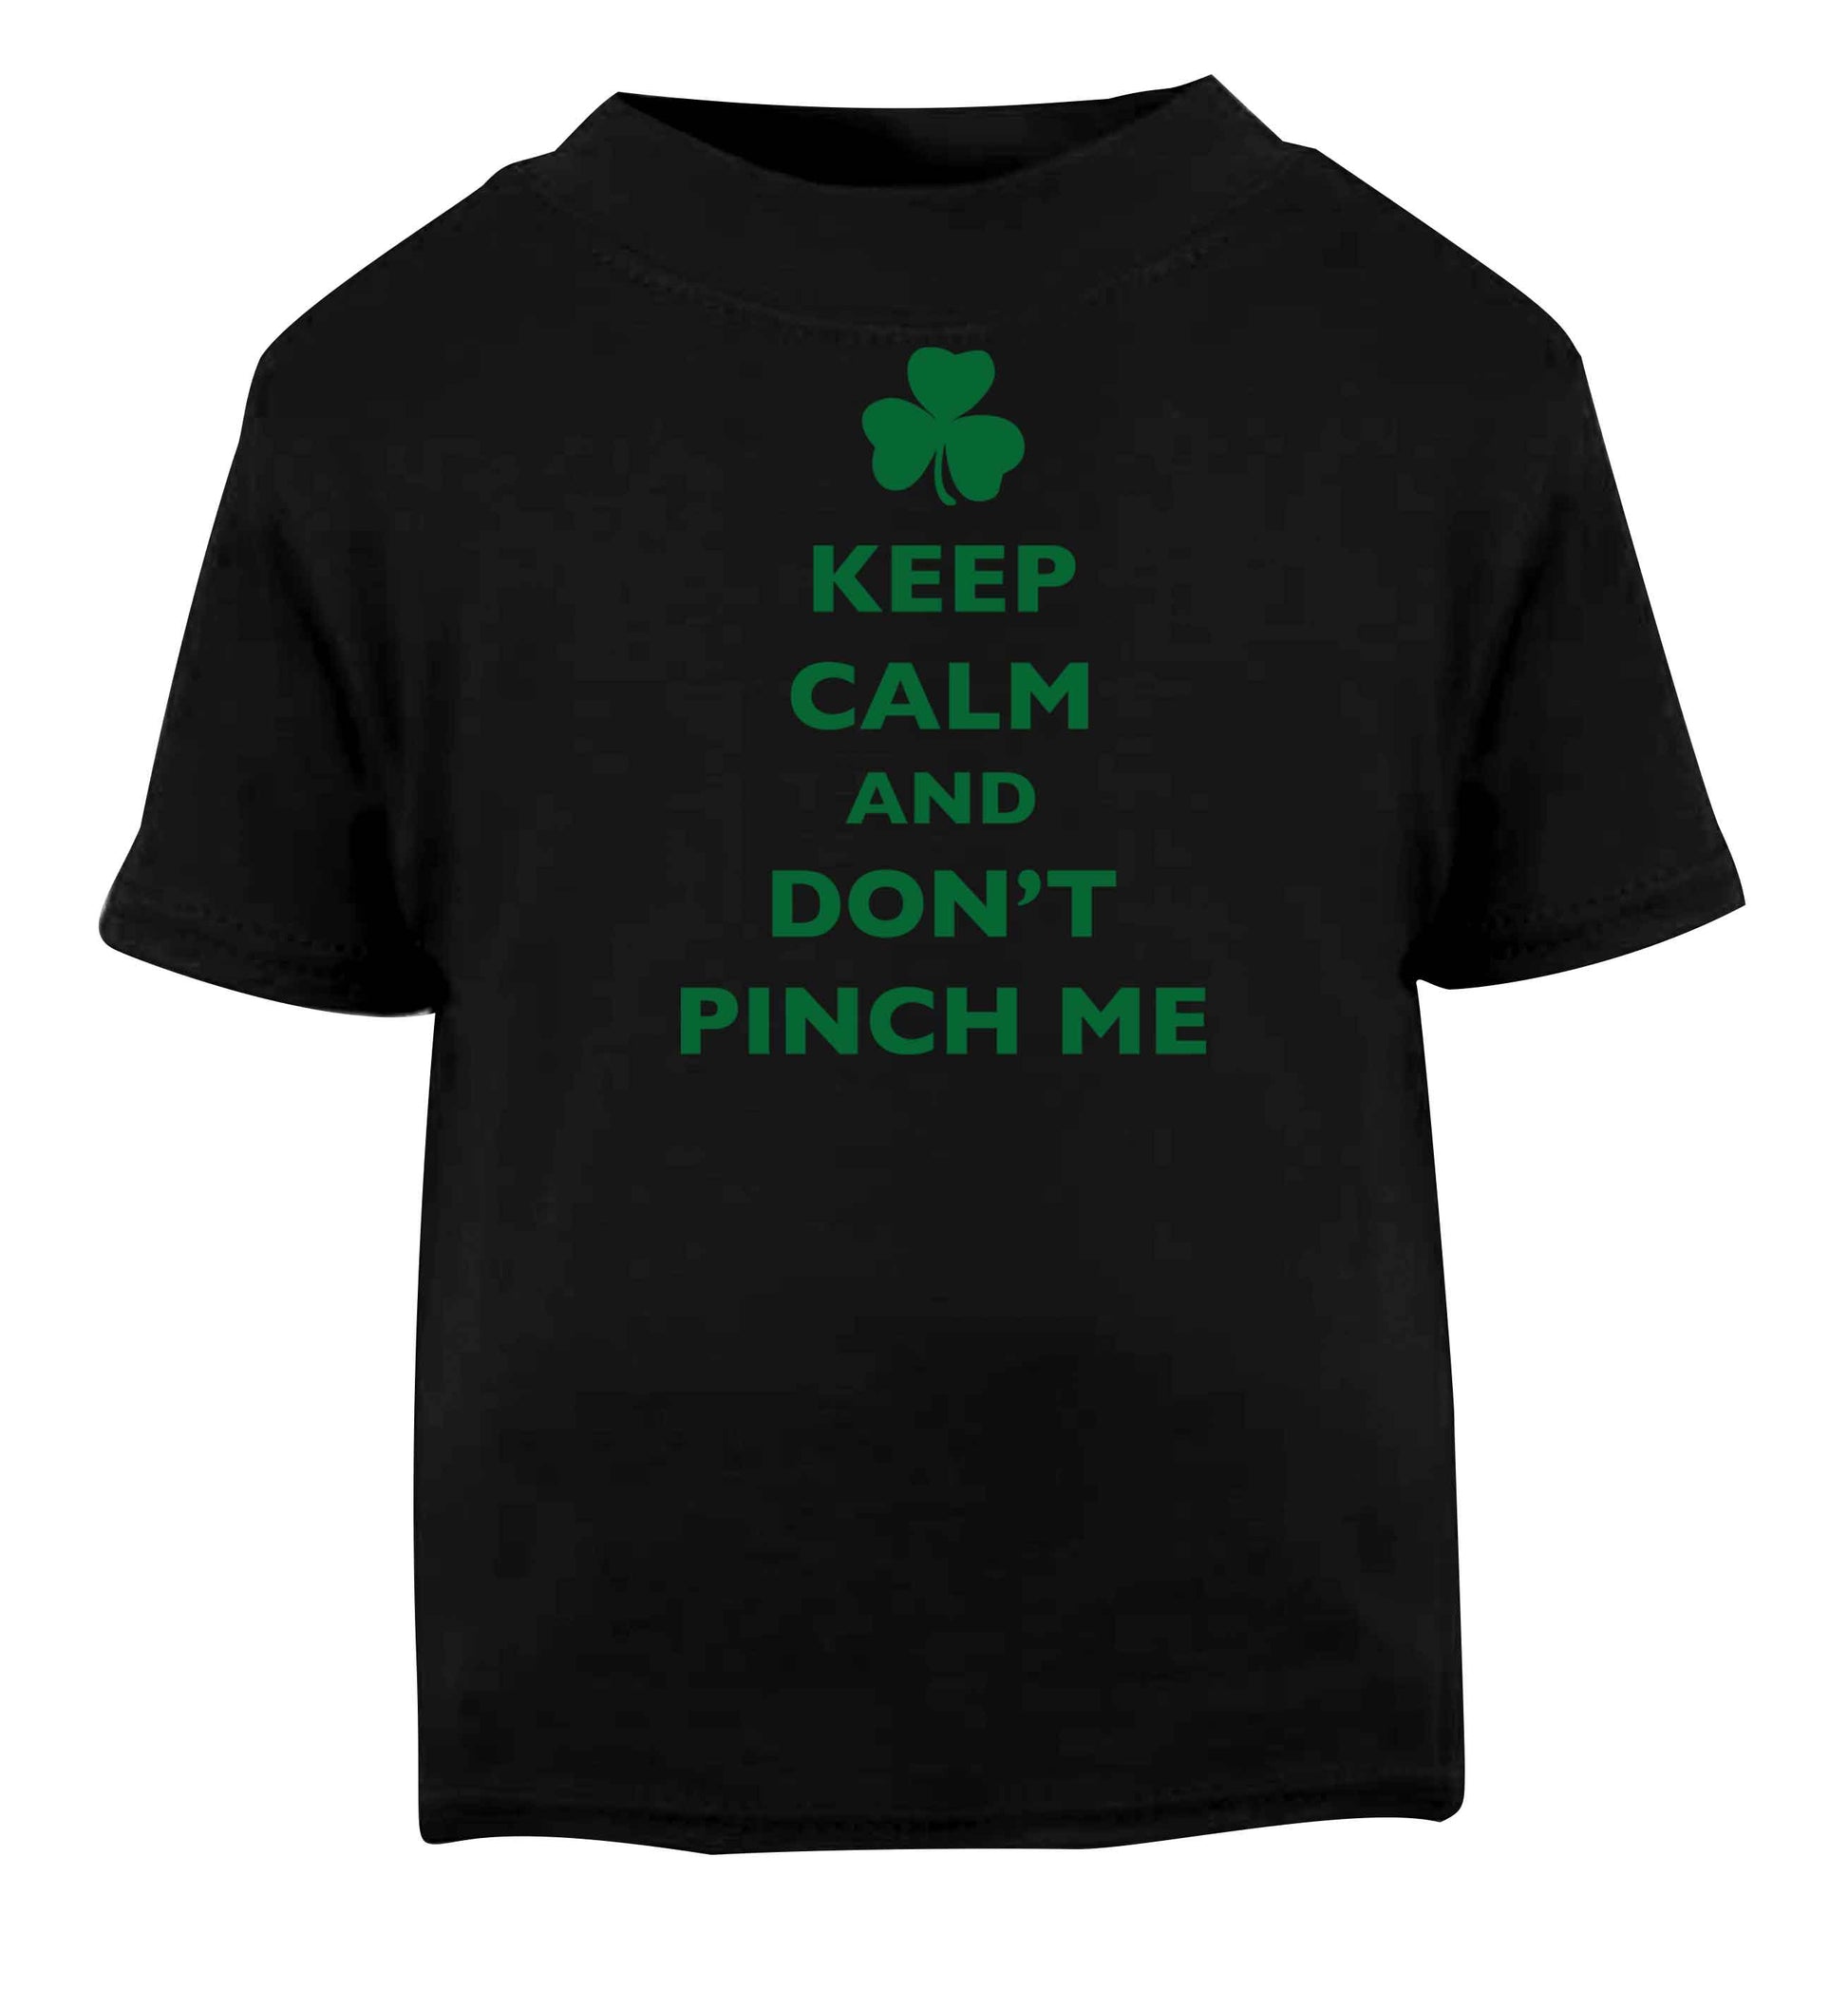 Keep calm and don't pinch me Black baby toddler Tshirt 2 years